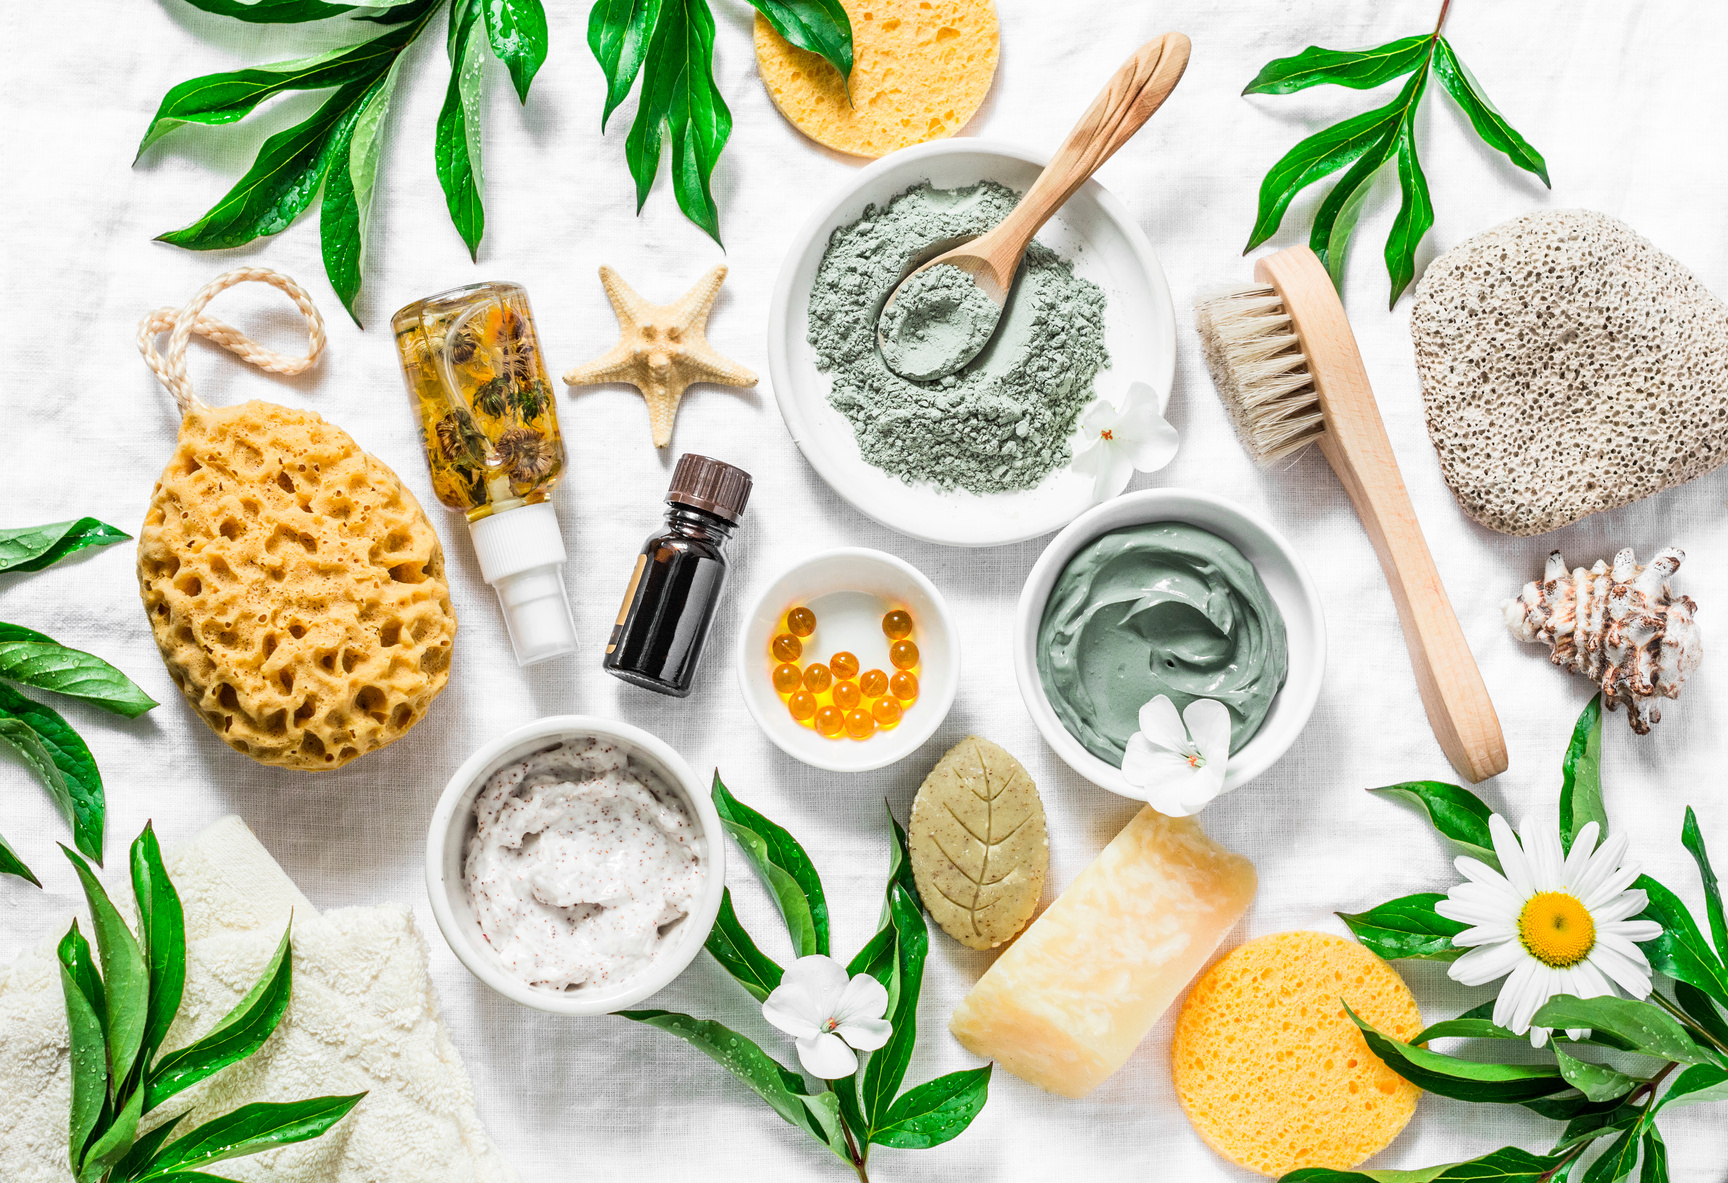 Flat lay beauty skin care ingredients, accessories. Natural beauty products on a light background, top view